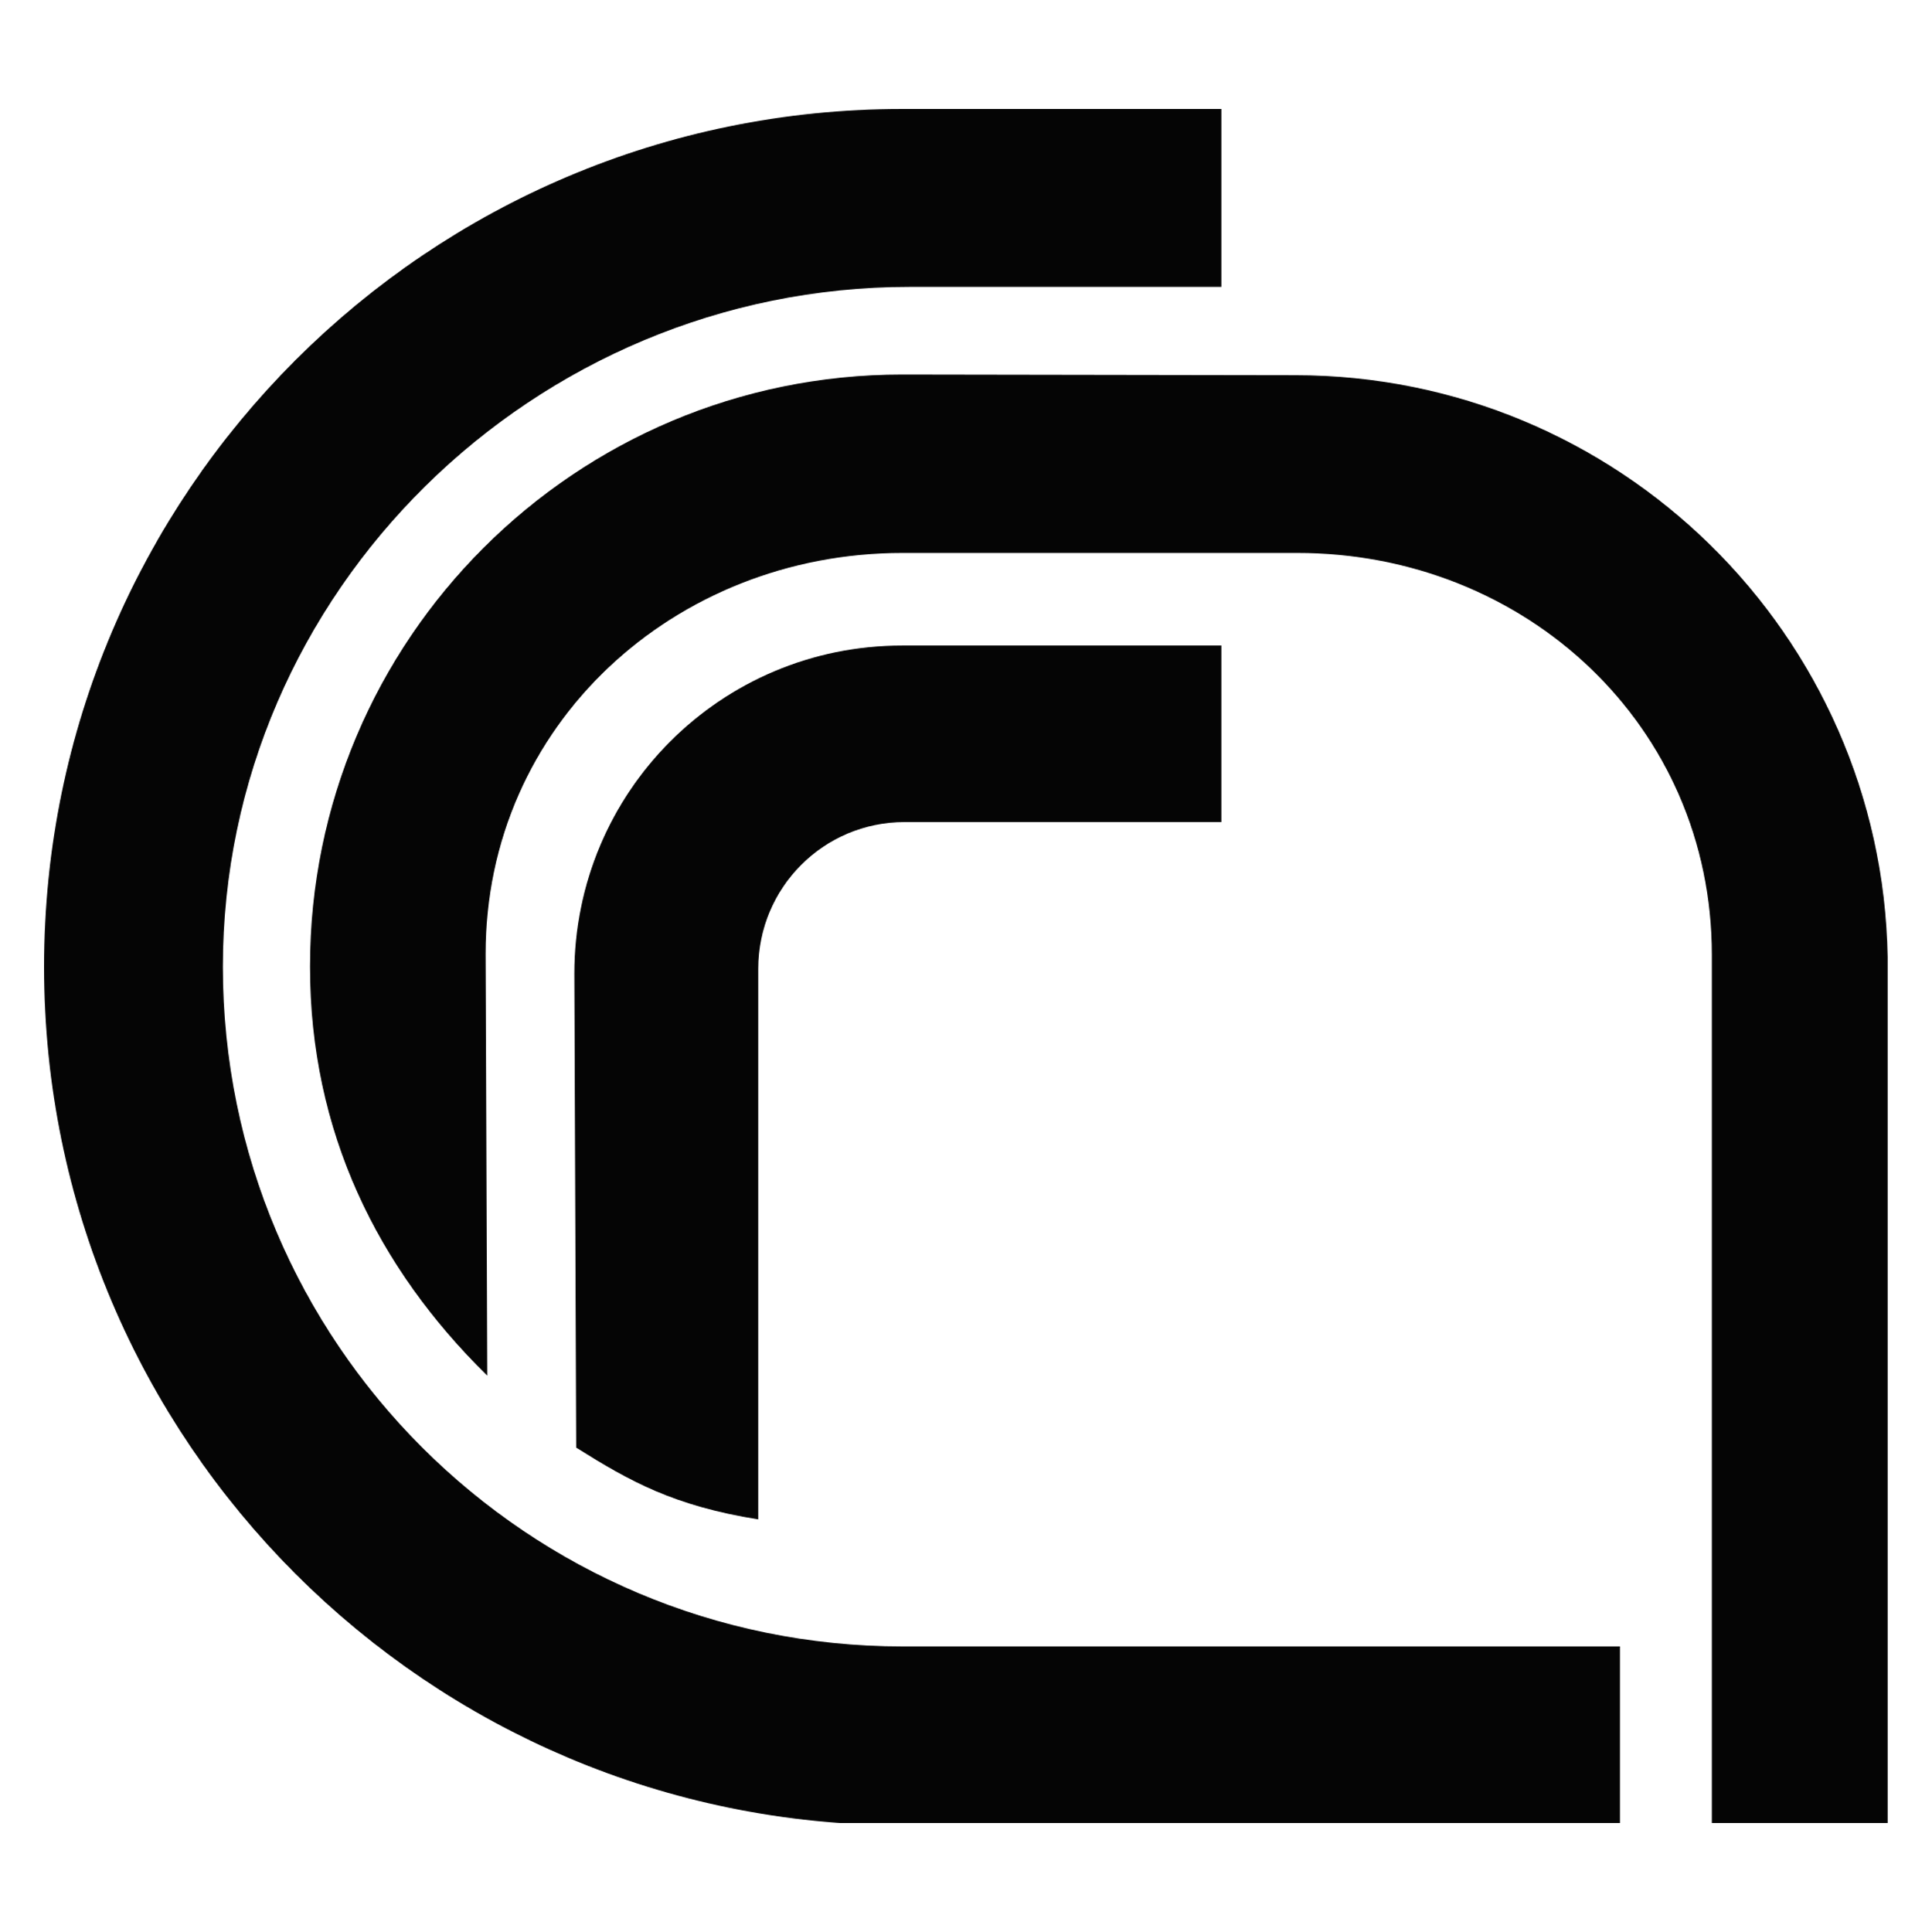 CNR Without Text Logo Transparent Picture